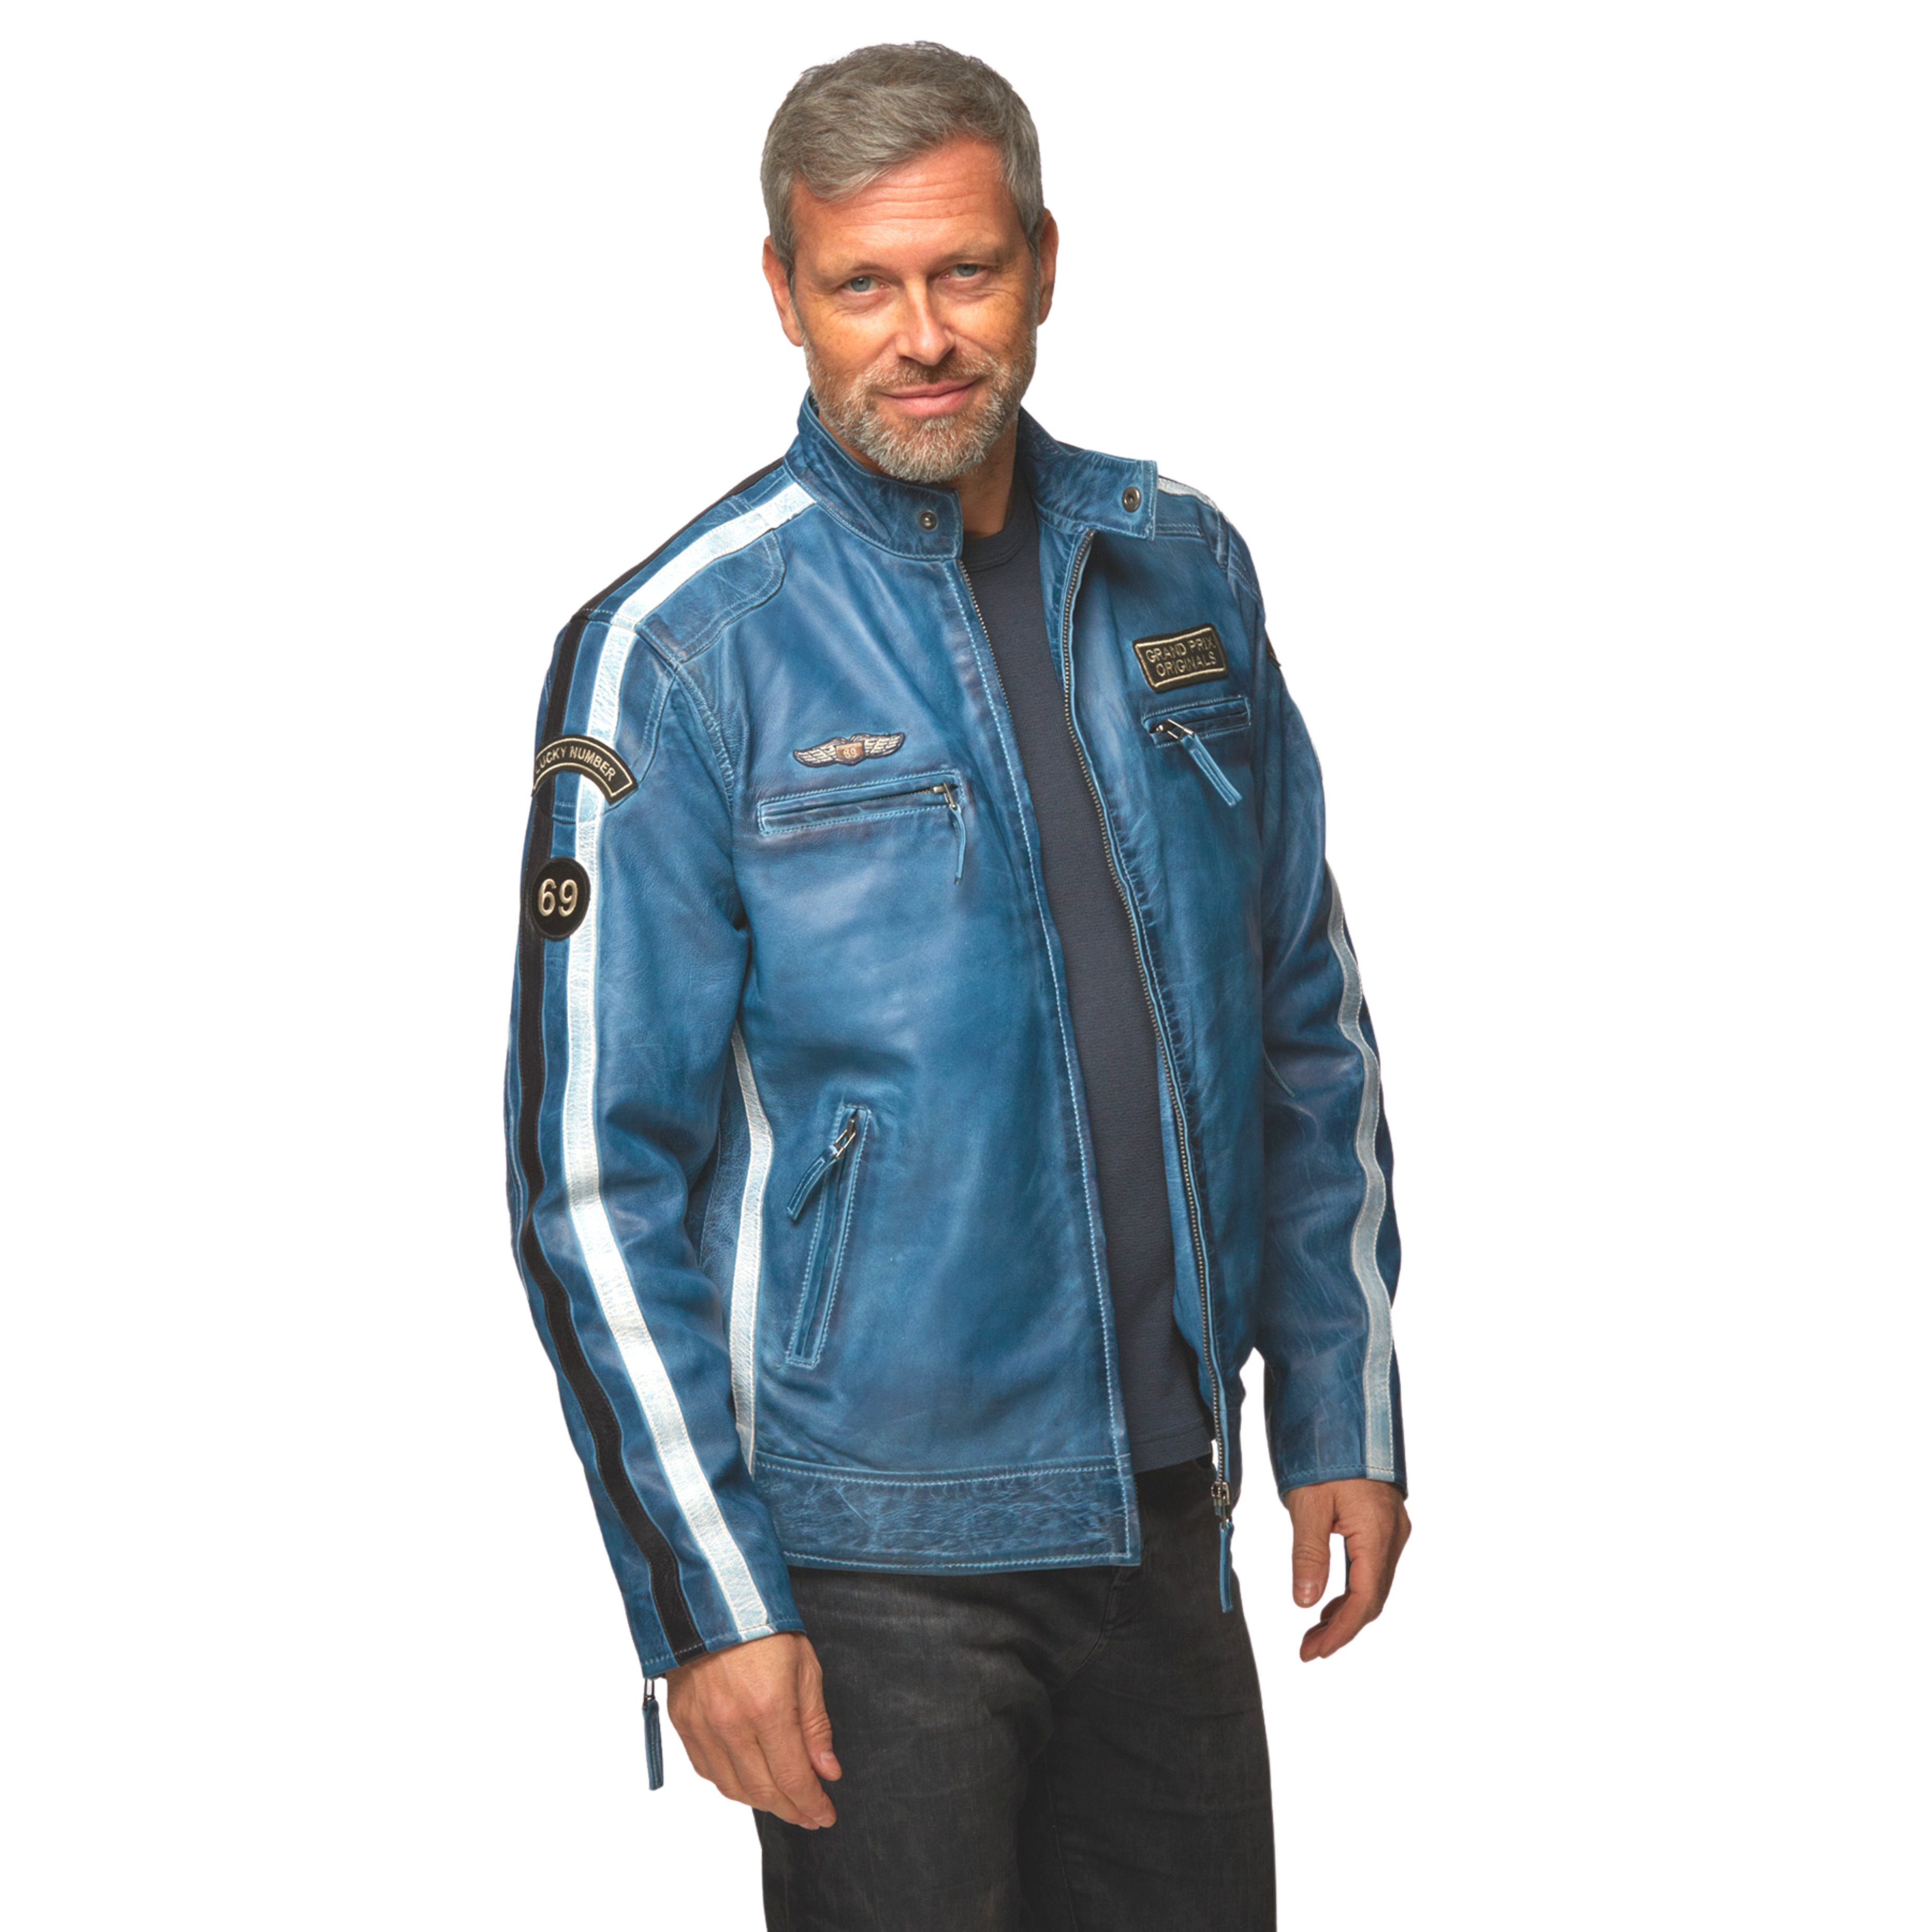 Blue Leather jackets for Women